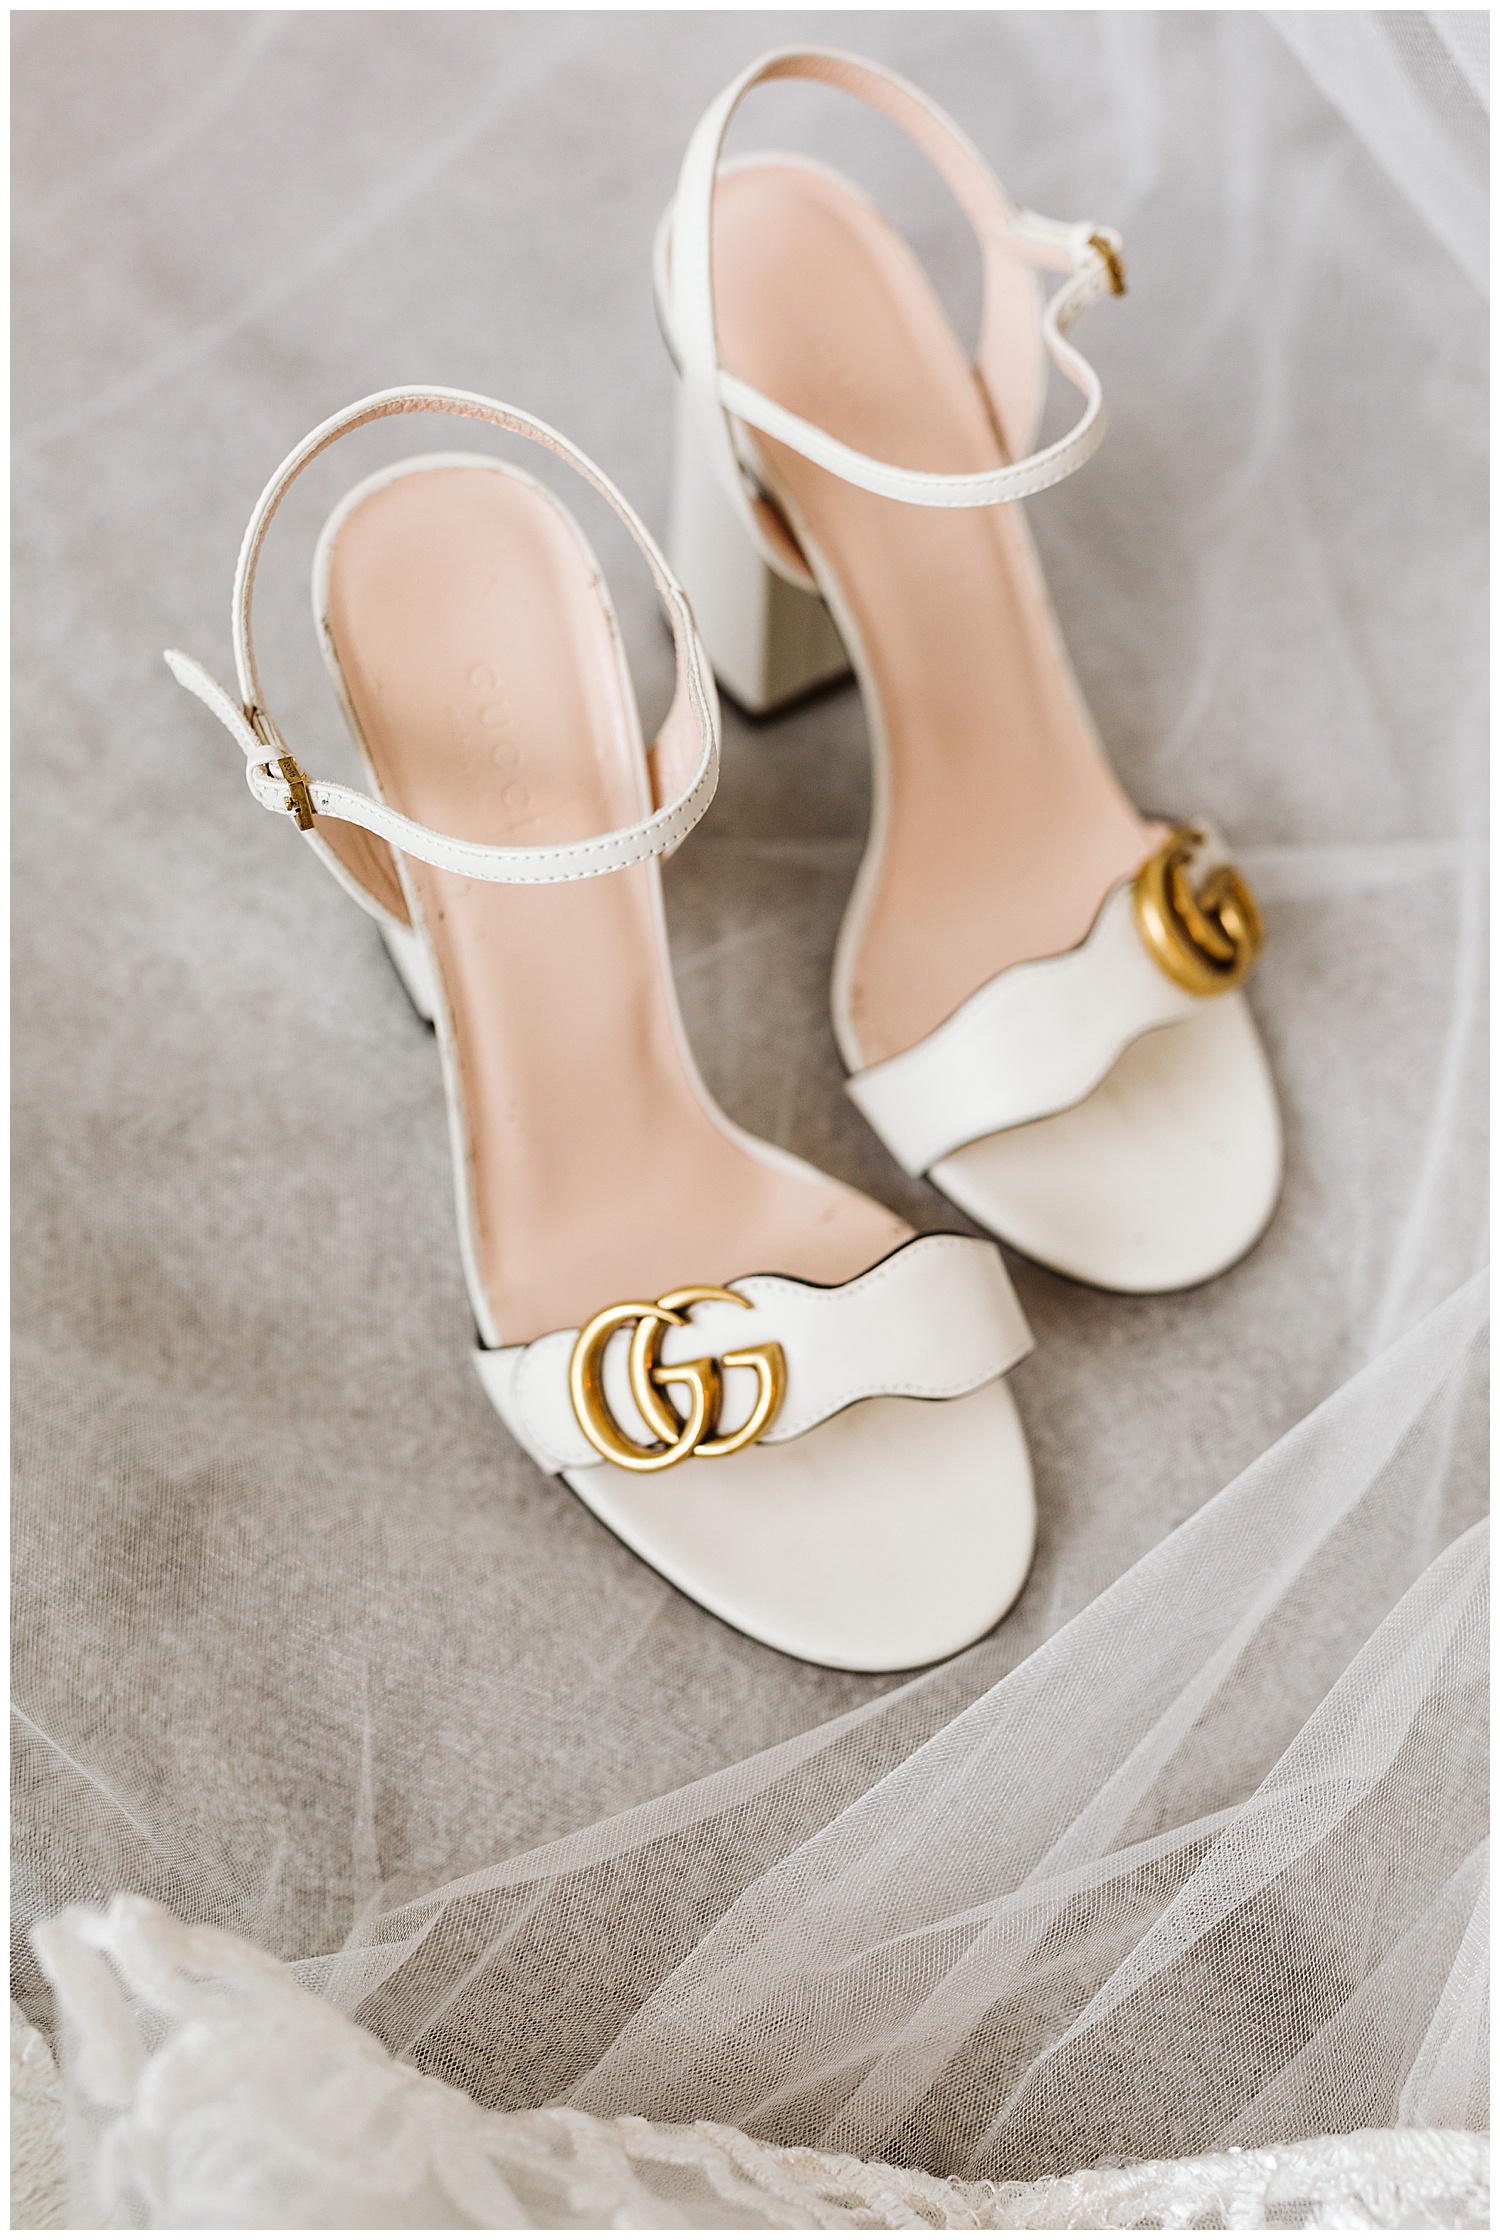 White Gucci shoes, white bridal veil, Nashville wedding photography, Country Music Hall of Fame wedding reception, Tennessee wedding Planning, Wedding Inspiration, Engagement Inspiration, Downtown Nashville